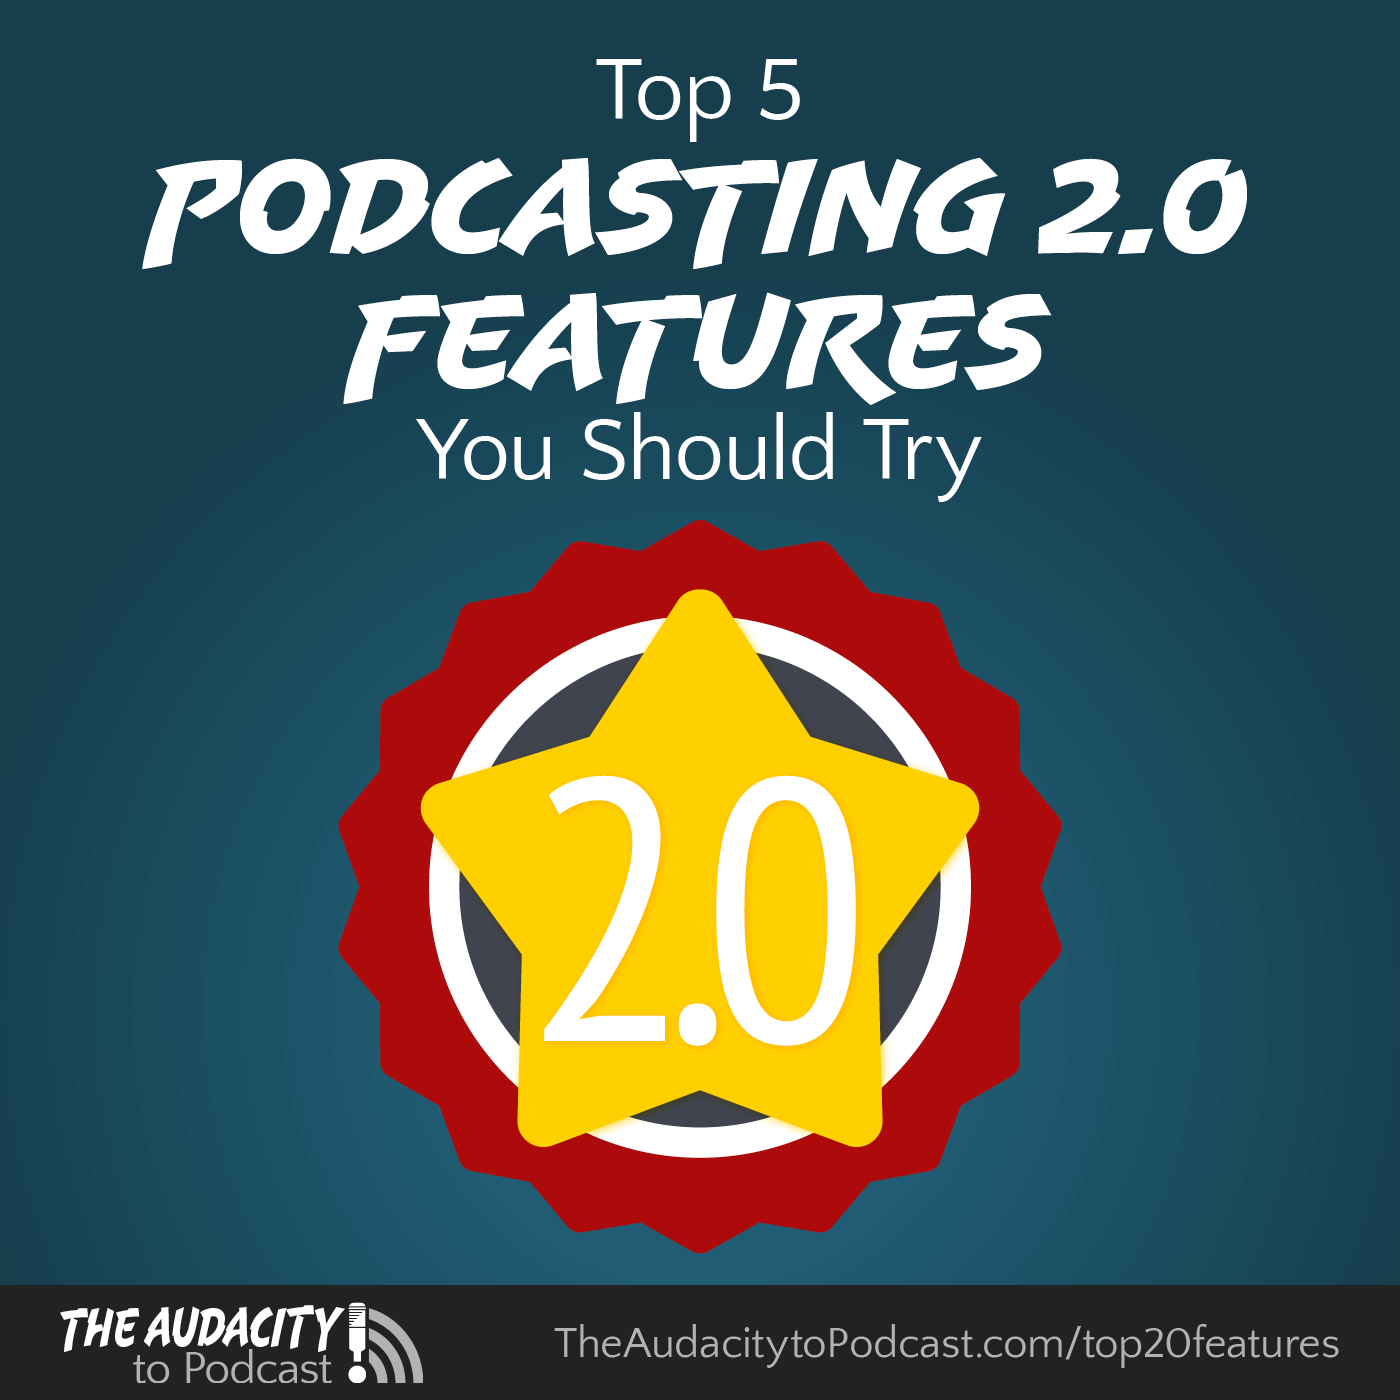 Top 5 Podcasting 2.0 Features You Should Try